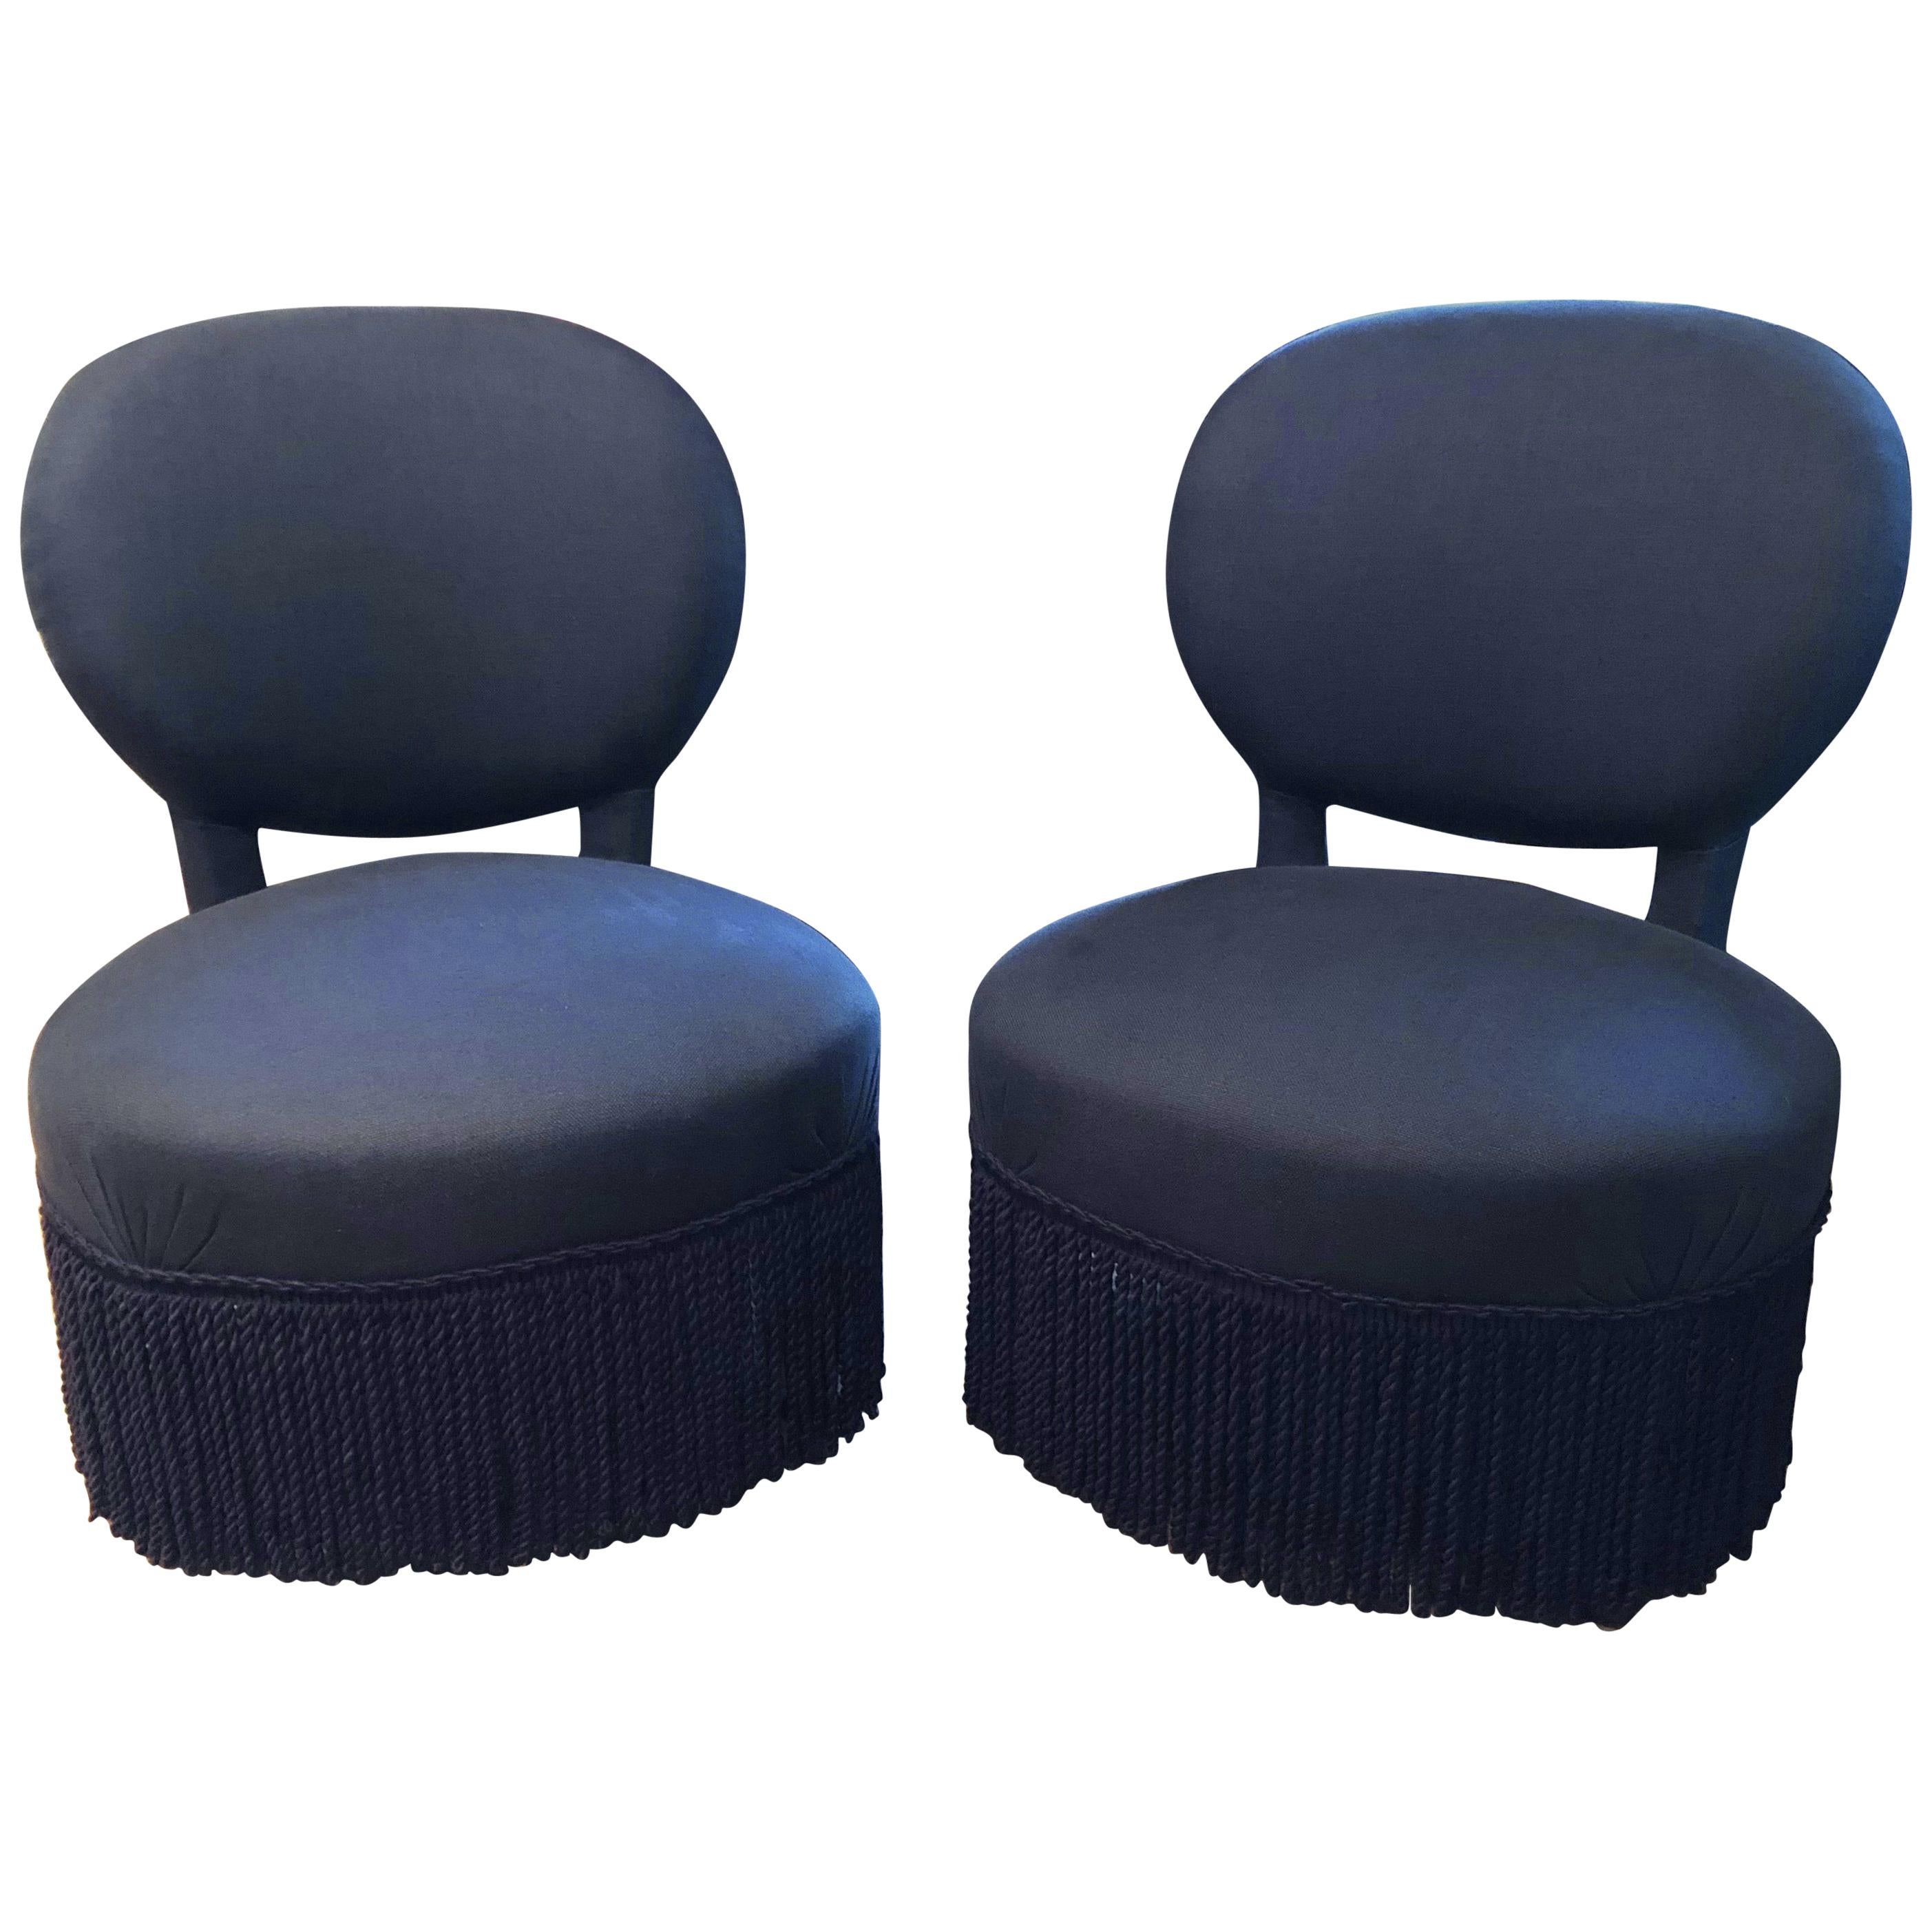 Pair of Napoleon Style Slipper Chairs